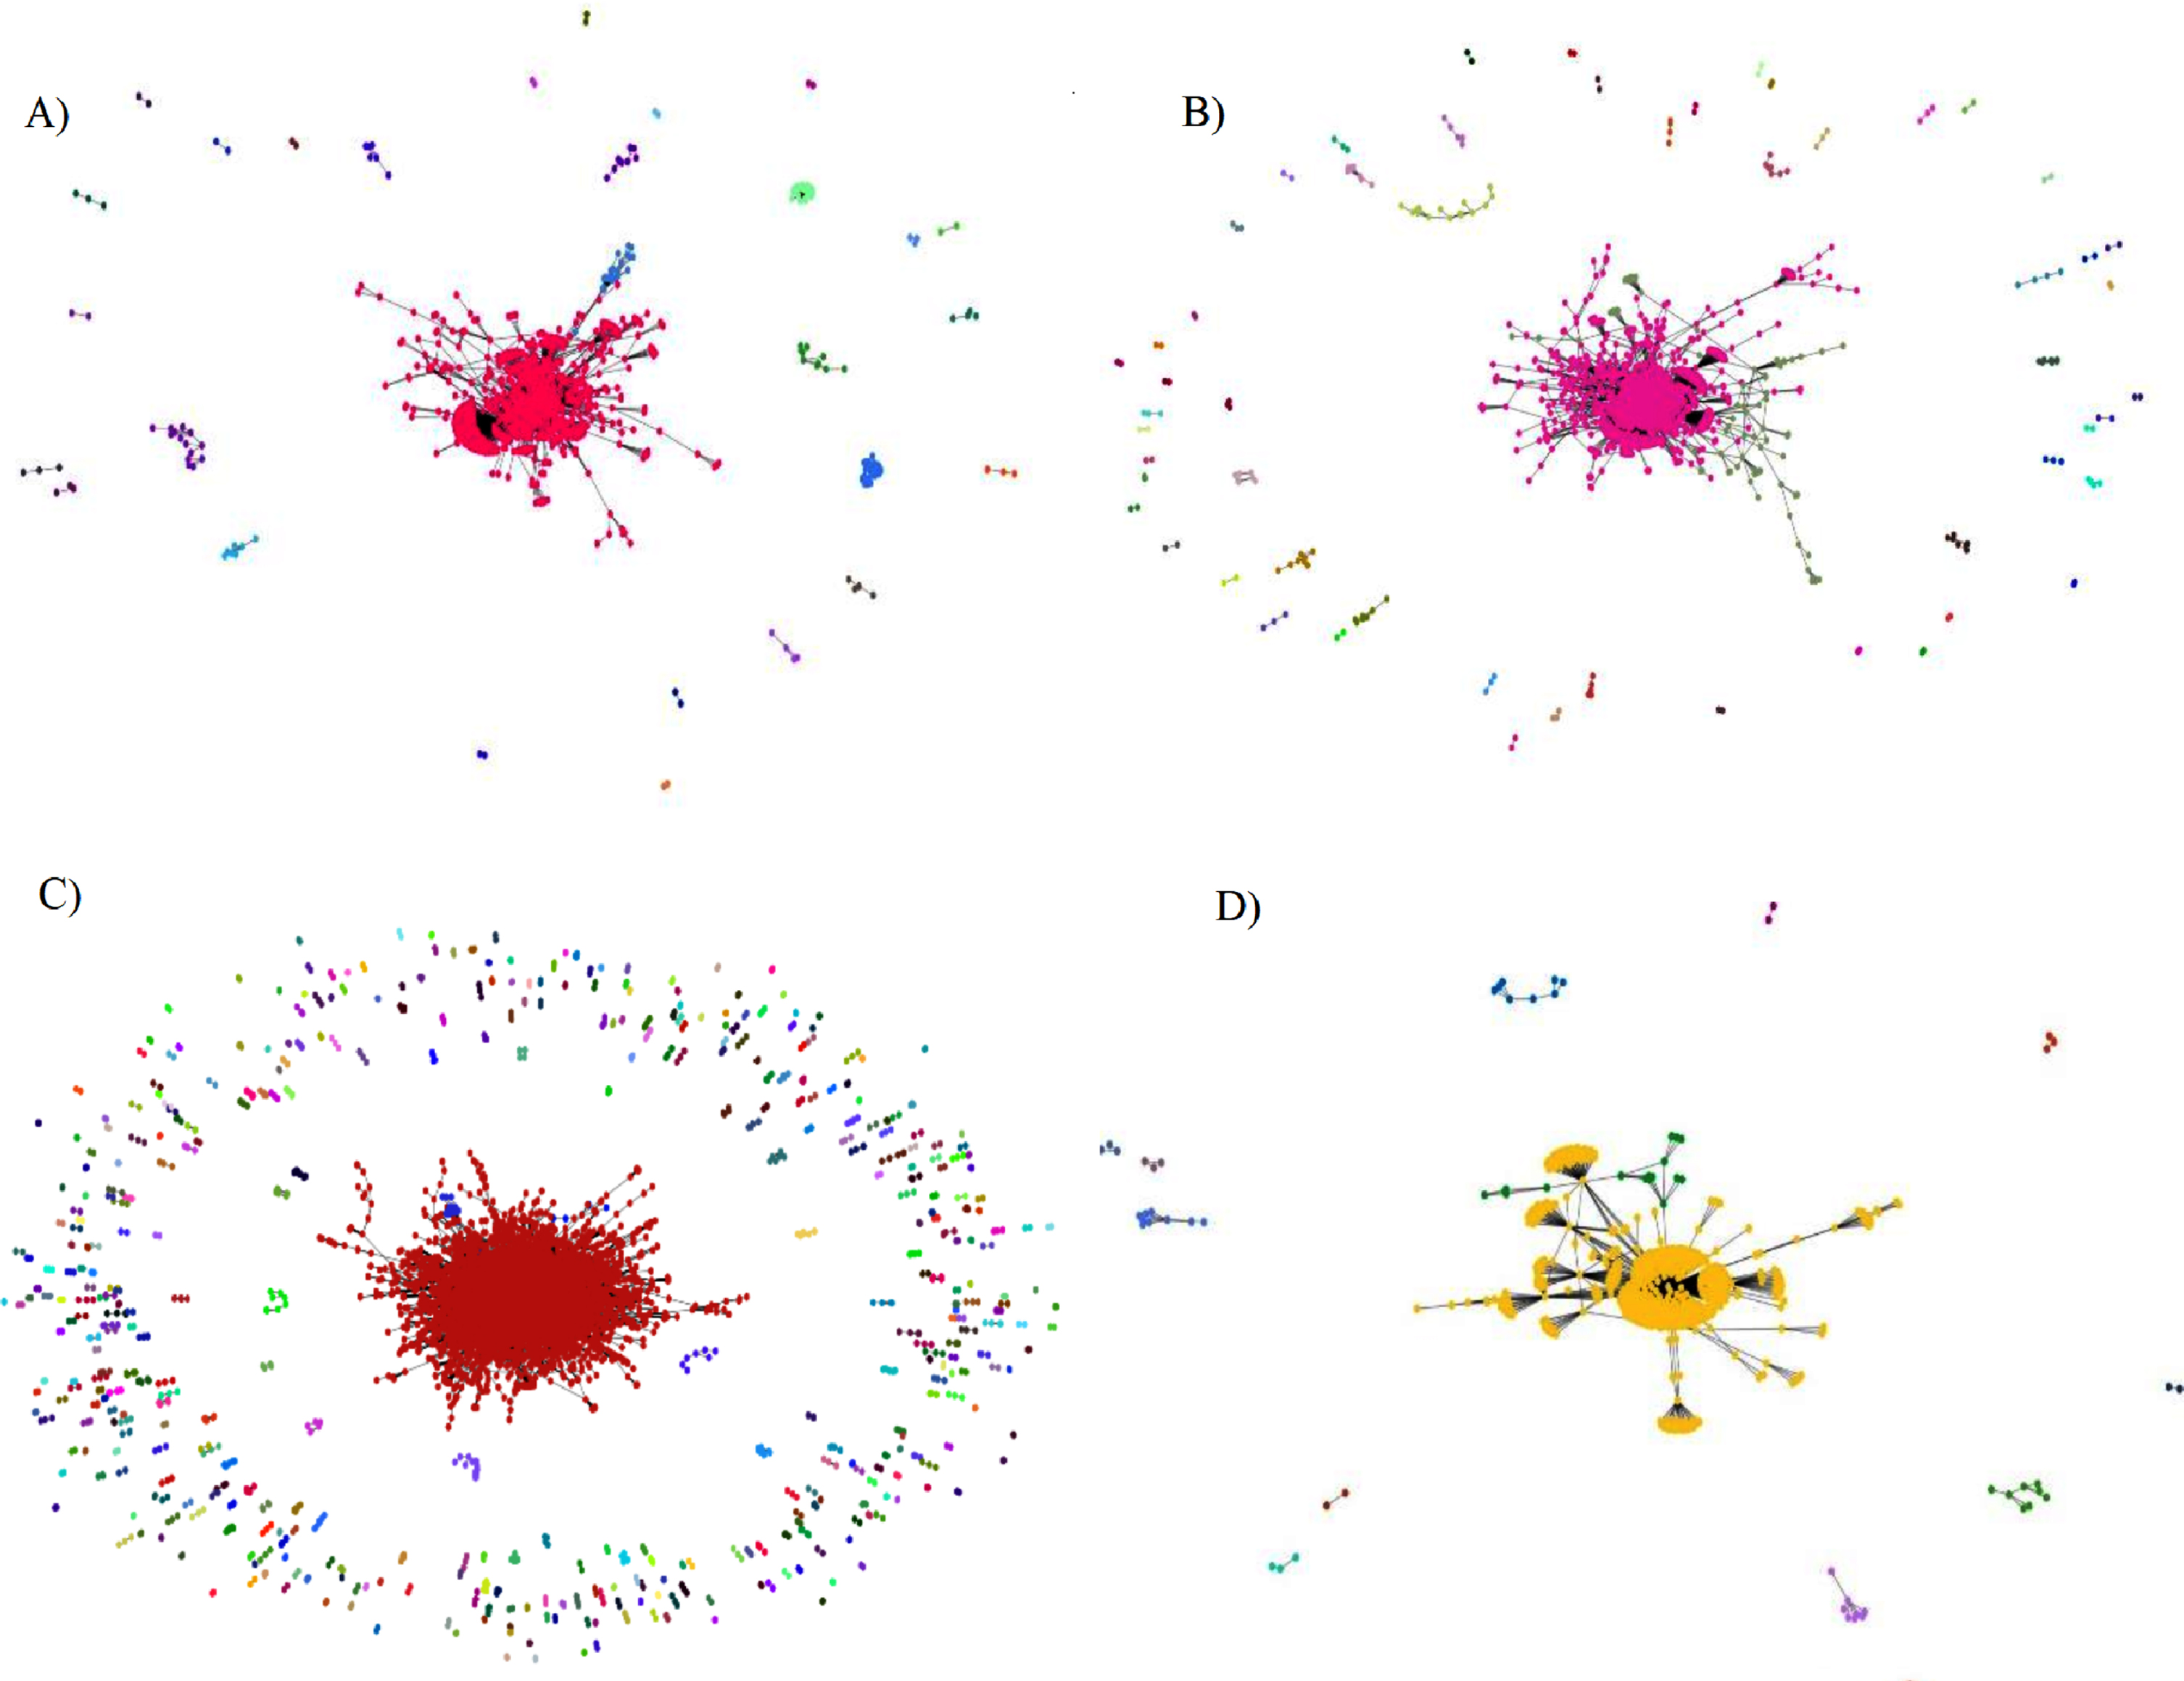 Complex networks and their communities by the Girvan-Newman algorithm.